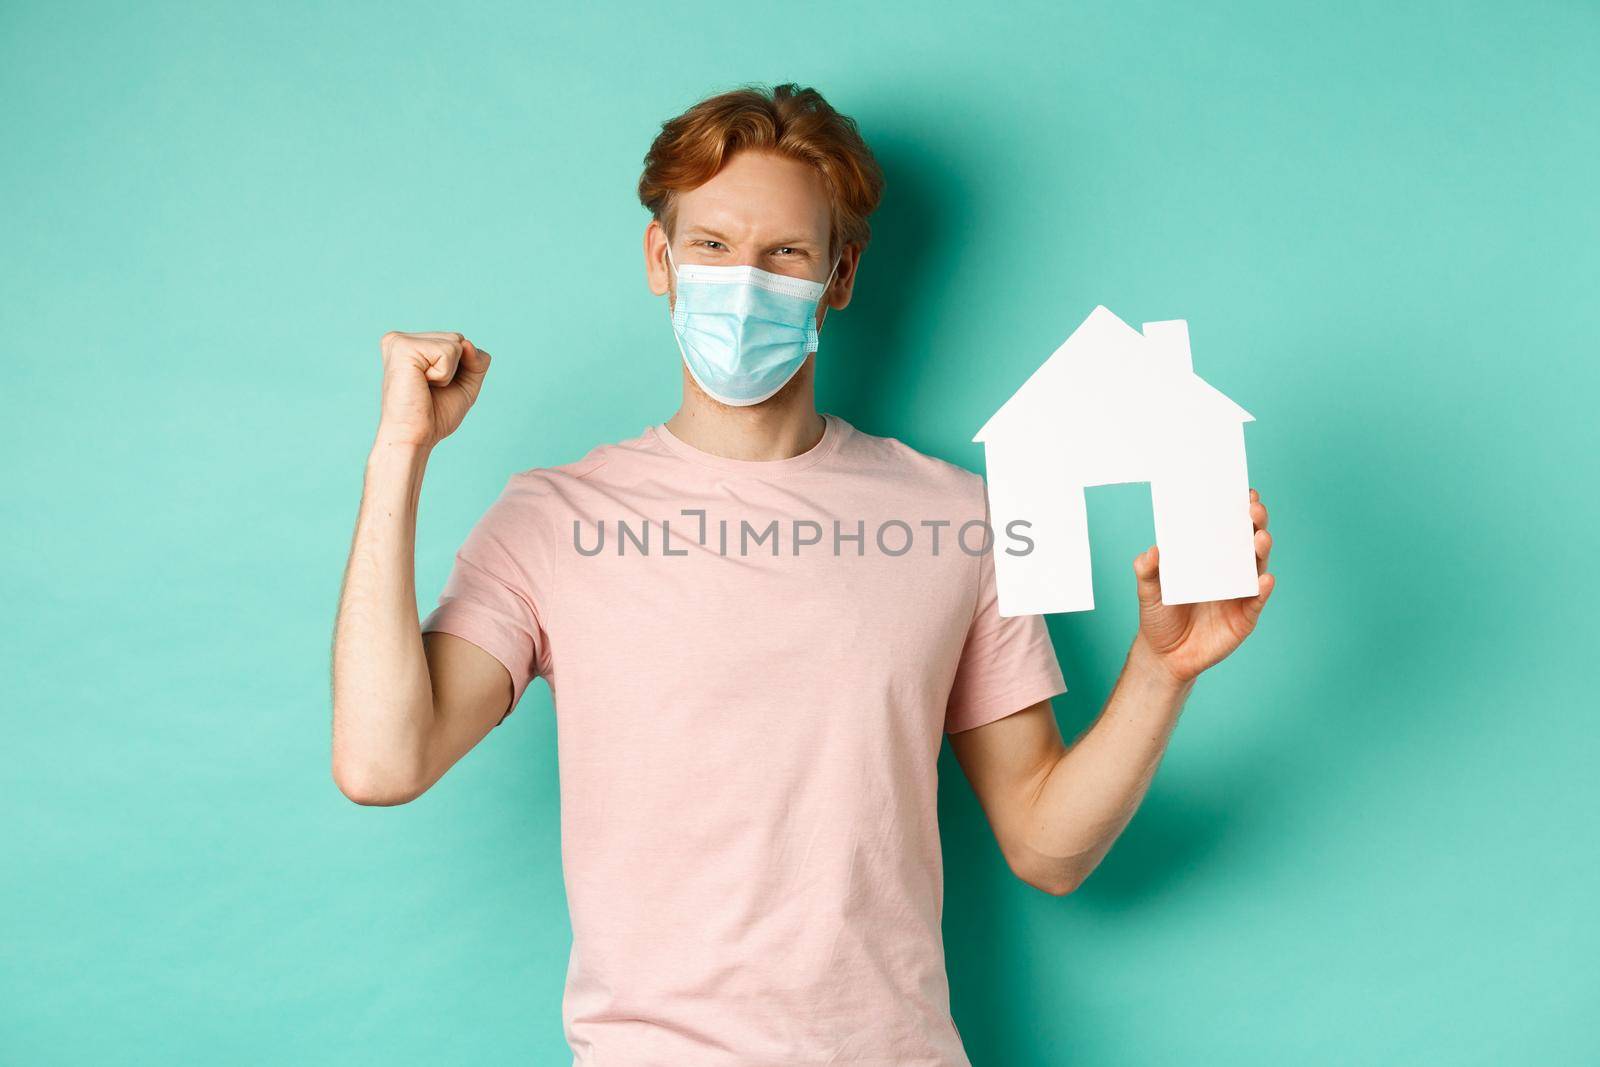 Covid-19 and real estate concept. Happy redhead man in medical mask, showing paper house cutout and fist pump, rejoicing and winning, standing over turquoise background.